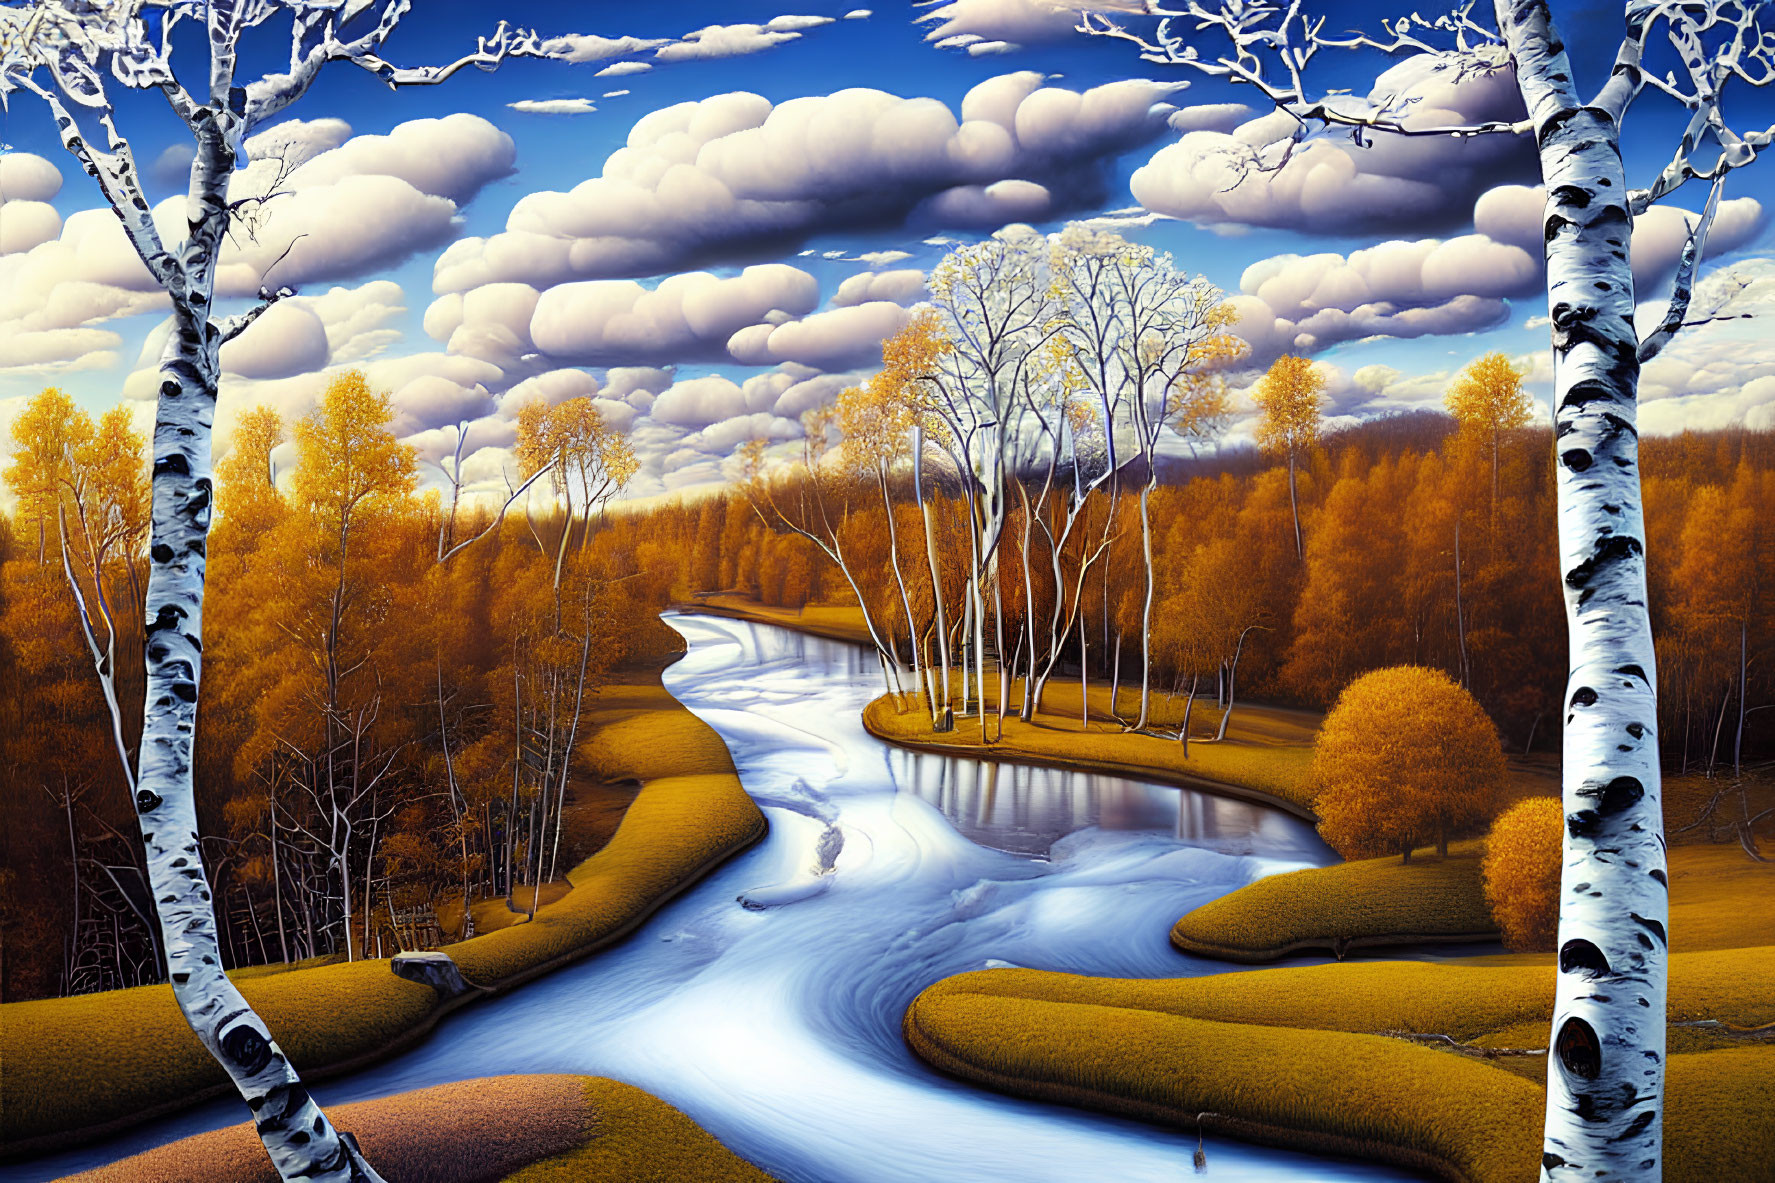 Colorful landscape painting of winding river and autumn trees under fluffy clouds